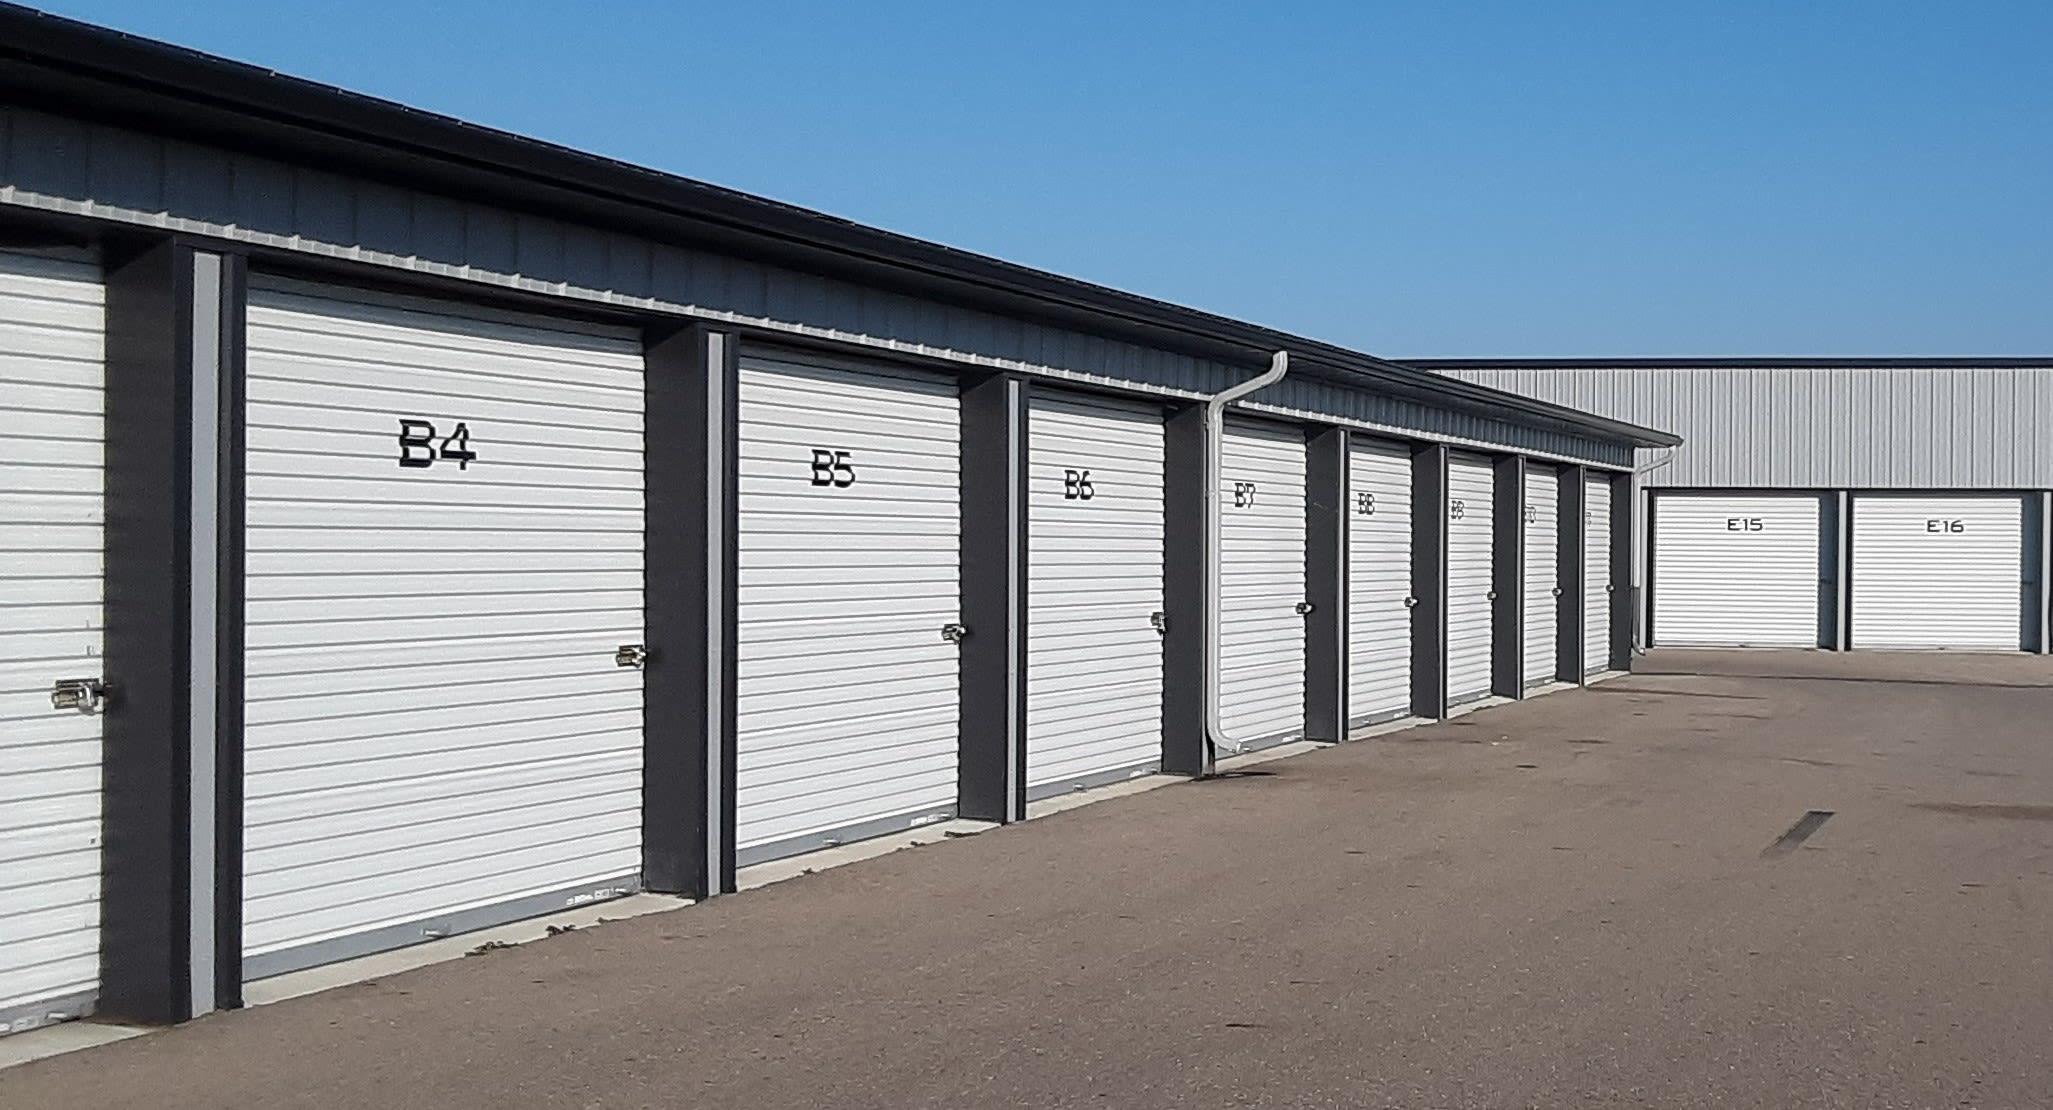 Outdoor view of storage units and wide driveways at KO Storage in Owatonna, Minnesota